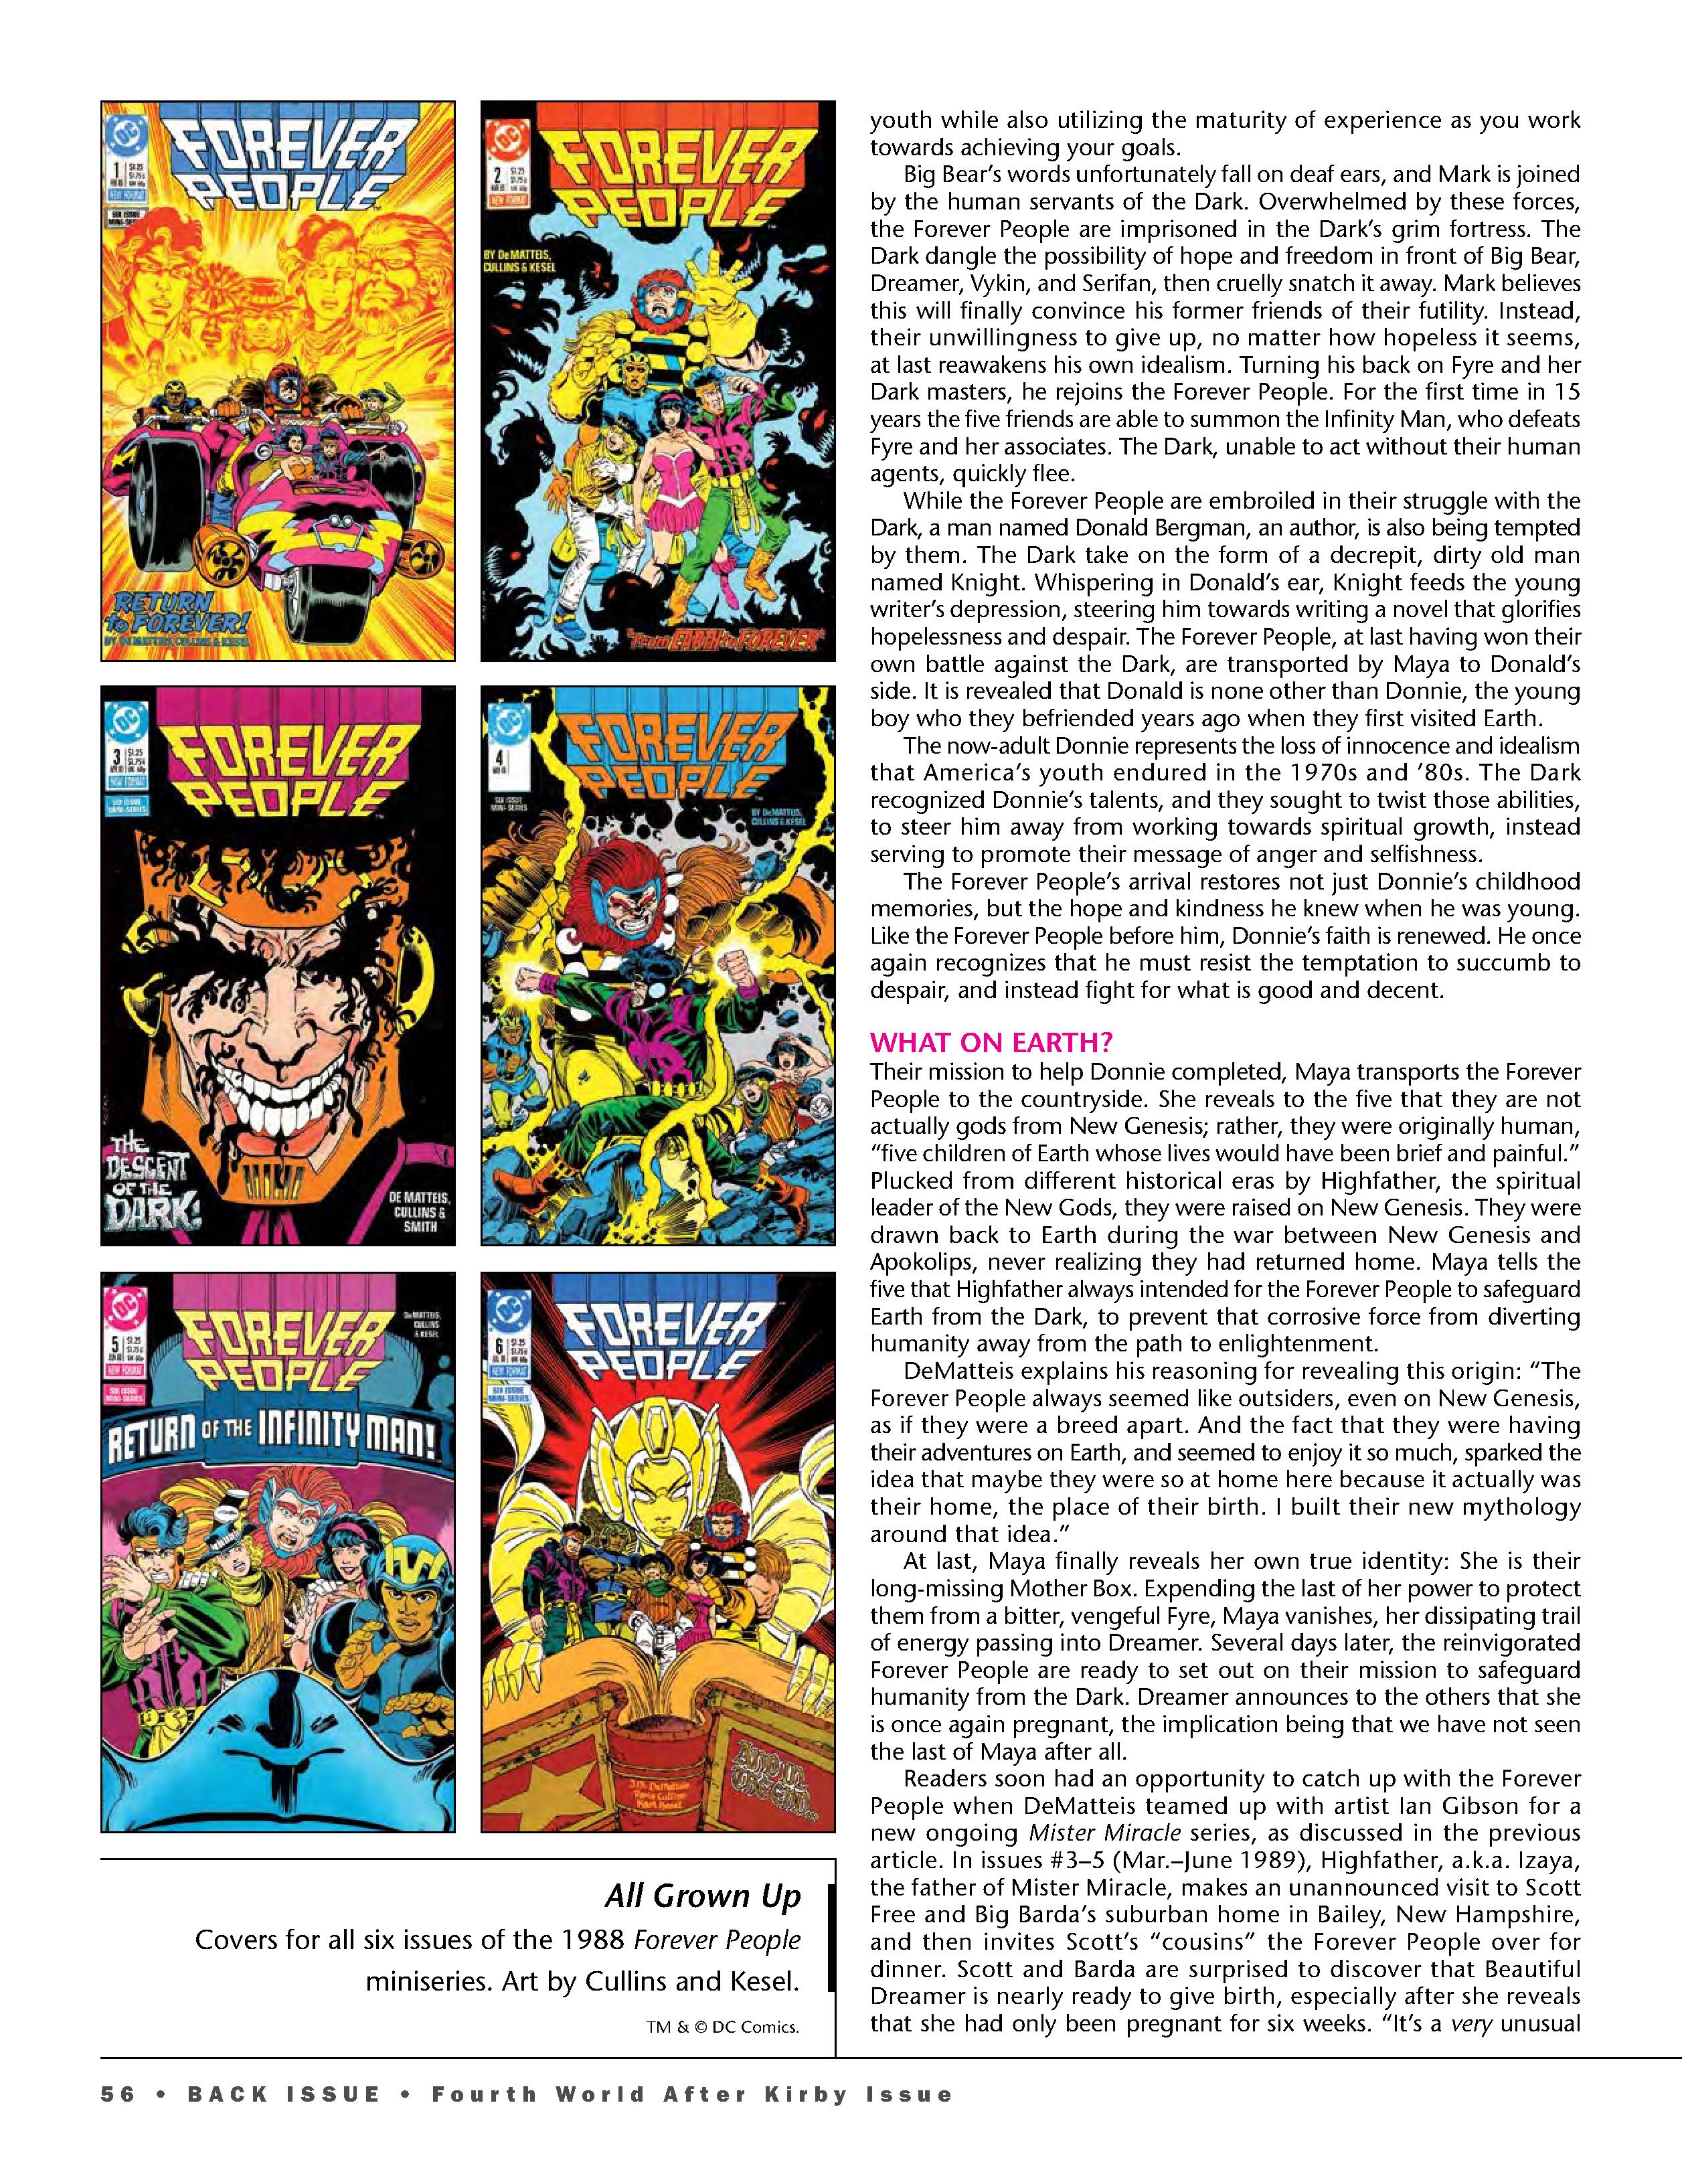 Read online Back Issue comic -  Issue #104 - 58